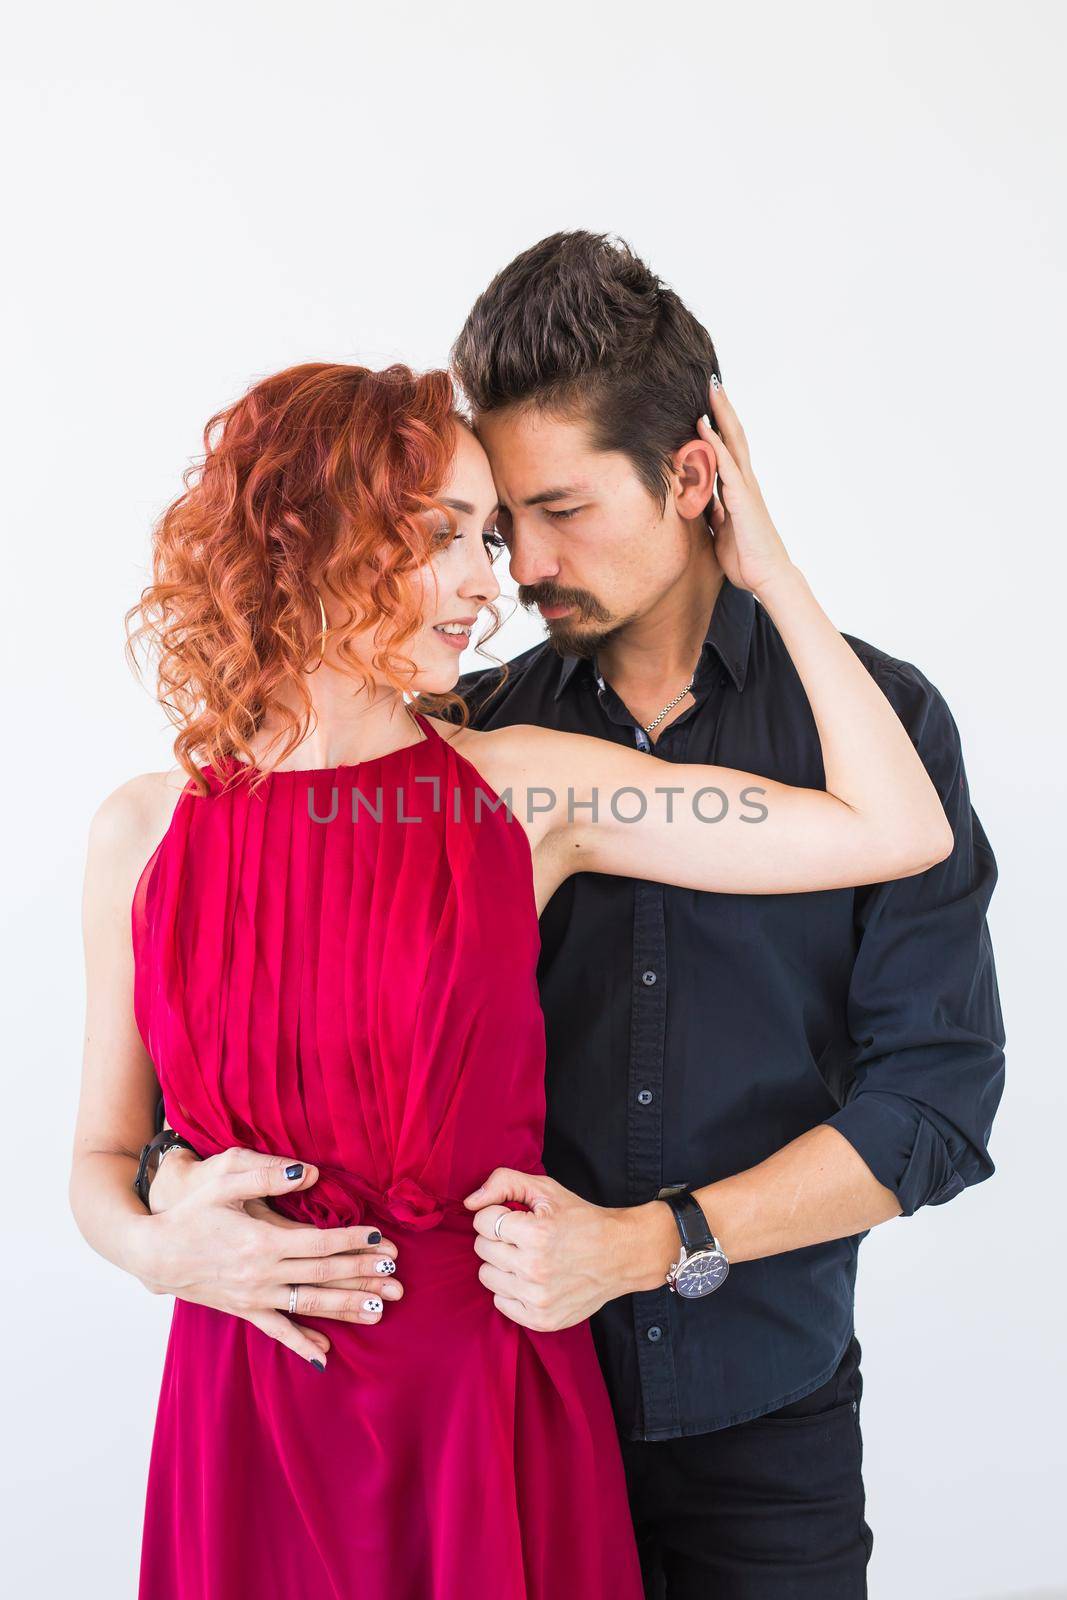 Romantic, social dance, people concept - couple dancing bachata in the studio, man hugging the woman from her back by Satura86